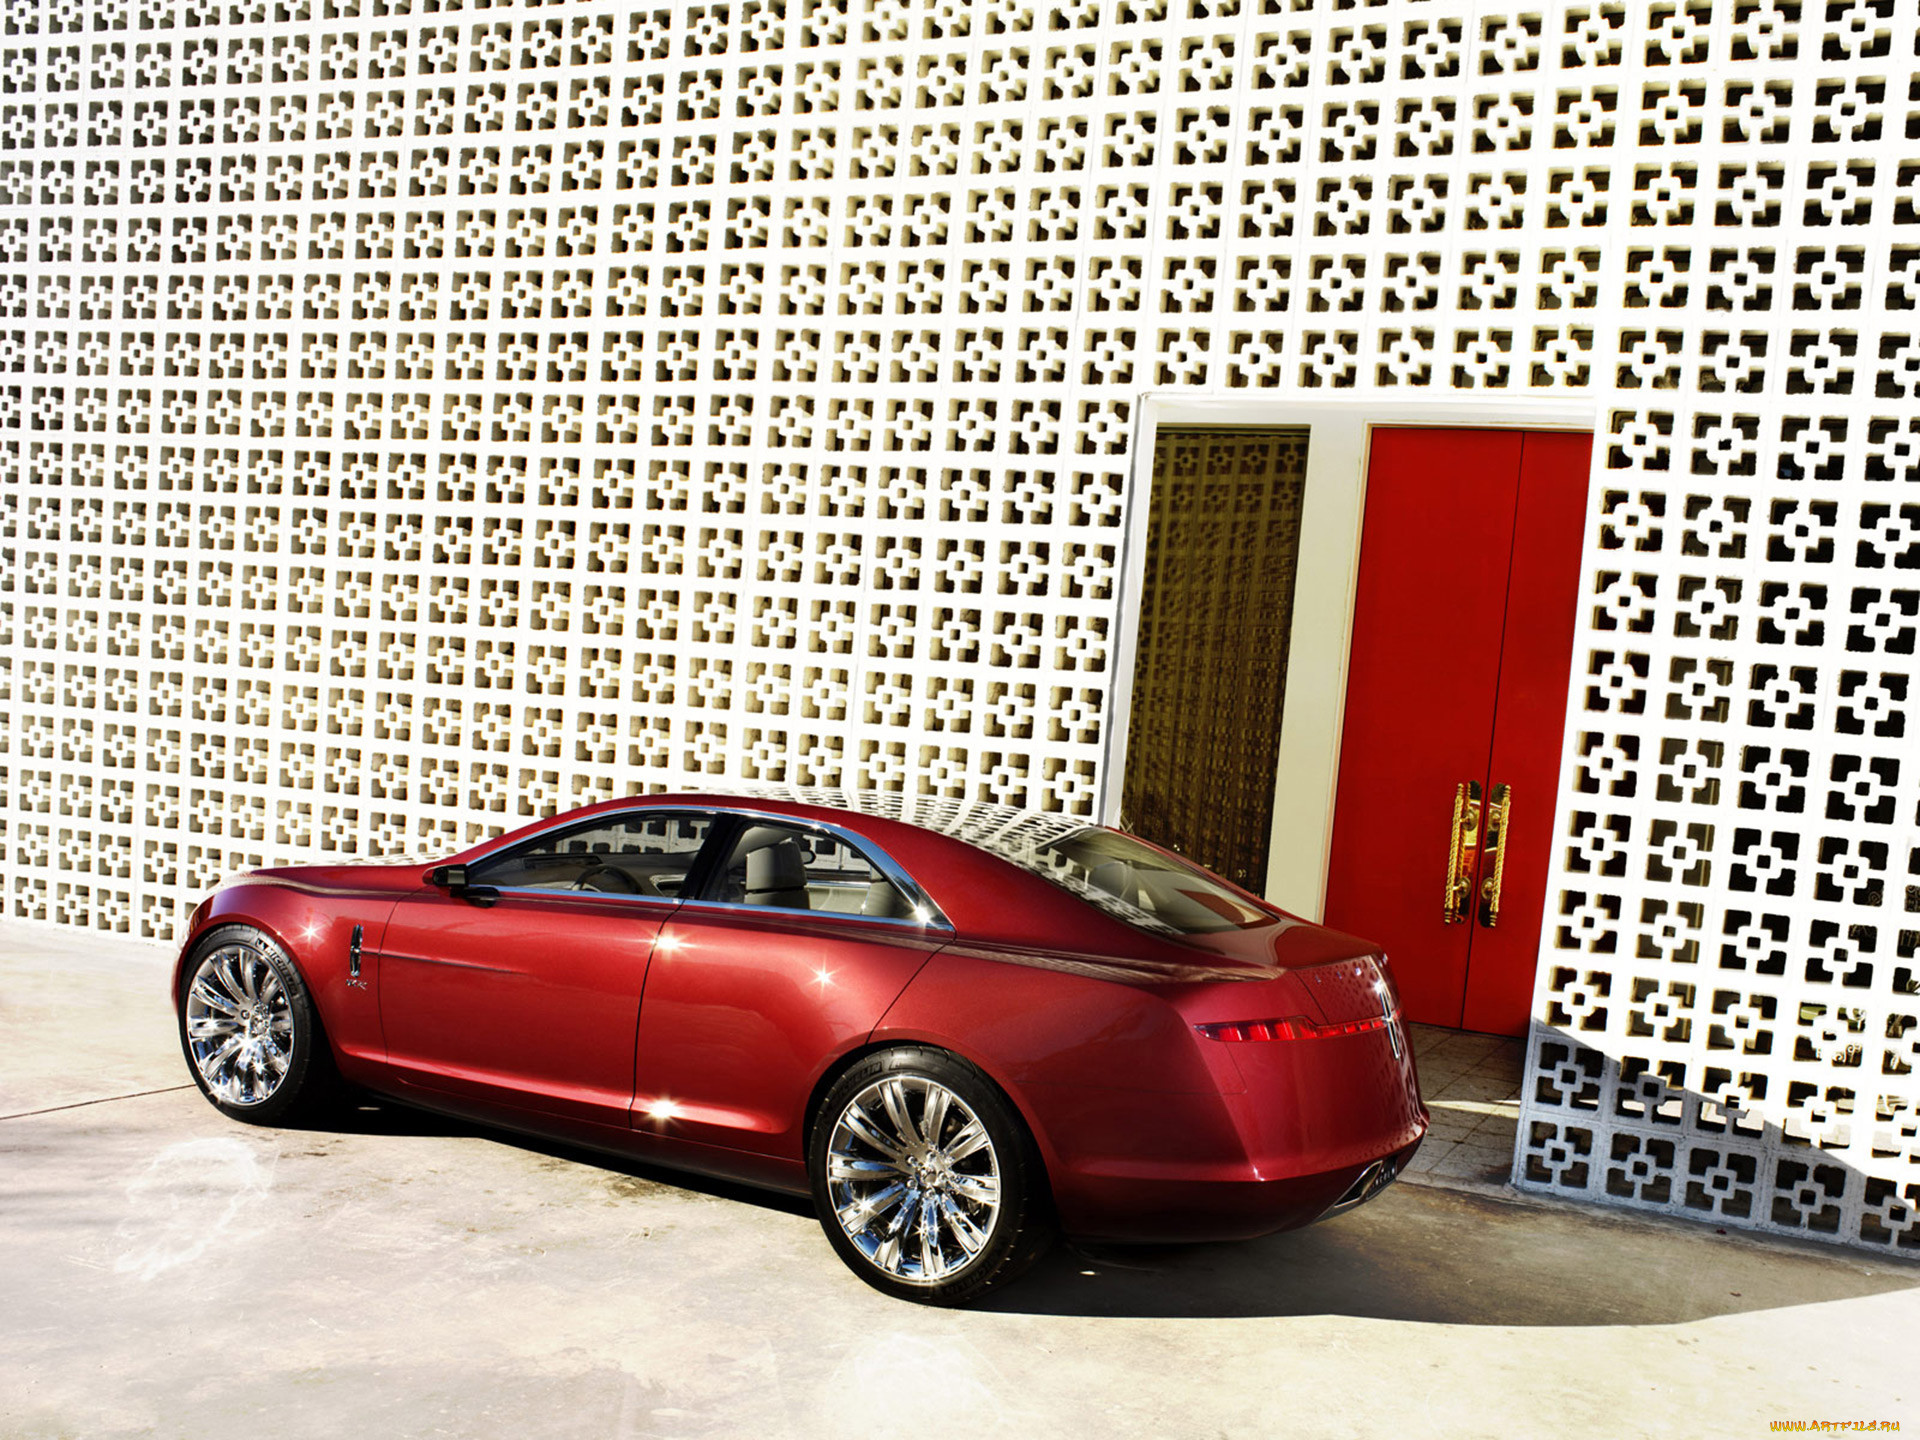 lincoln mkr concept 2007, , lincoln, concept, 2007, mkr